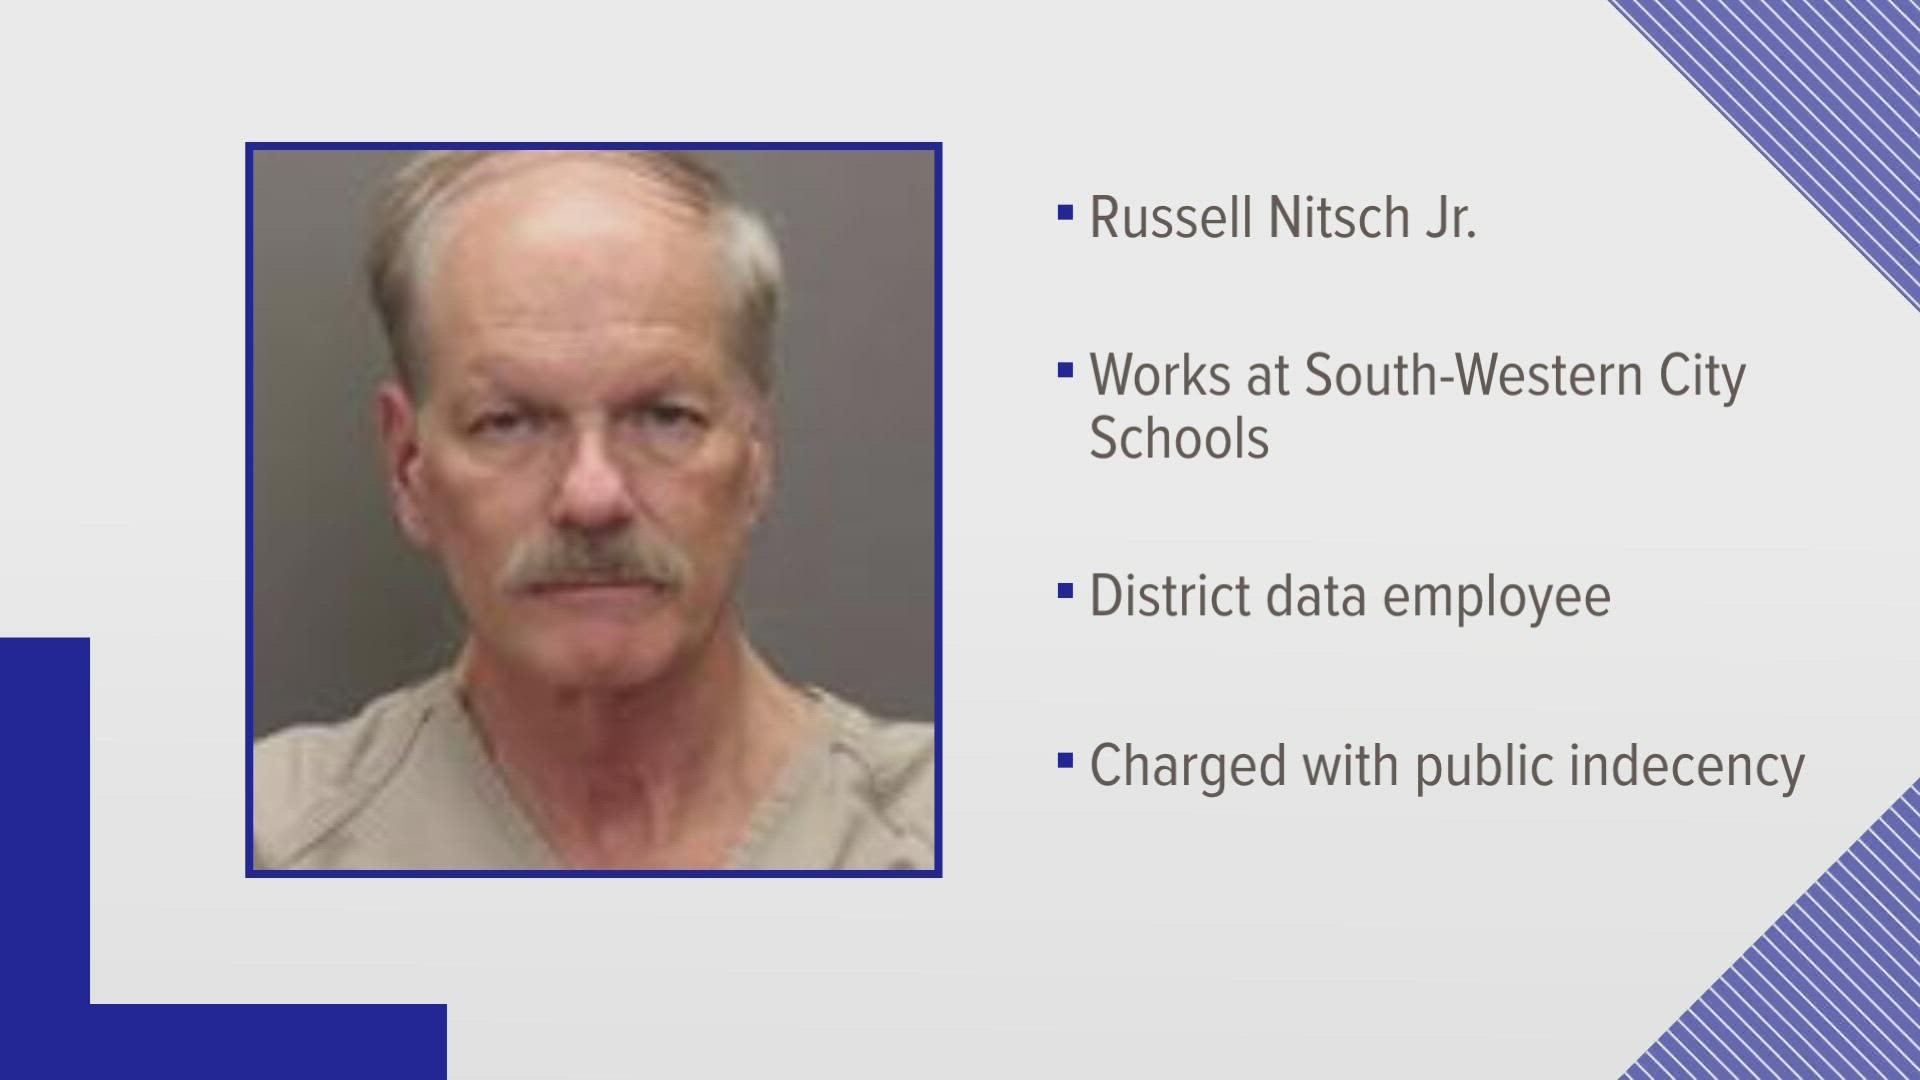 Russell Nitsch Jr. was arrested and charged with two counts of public indecency.